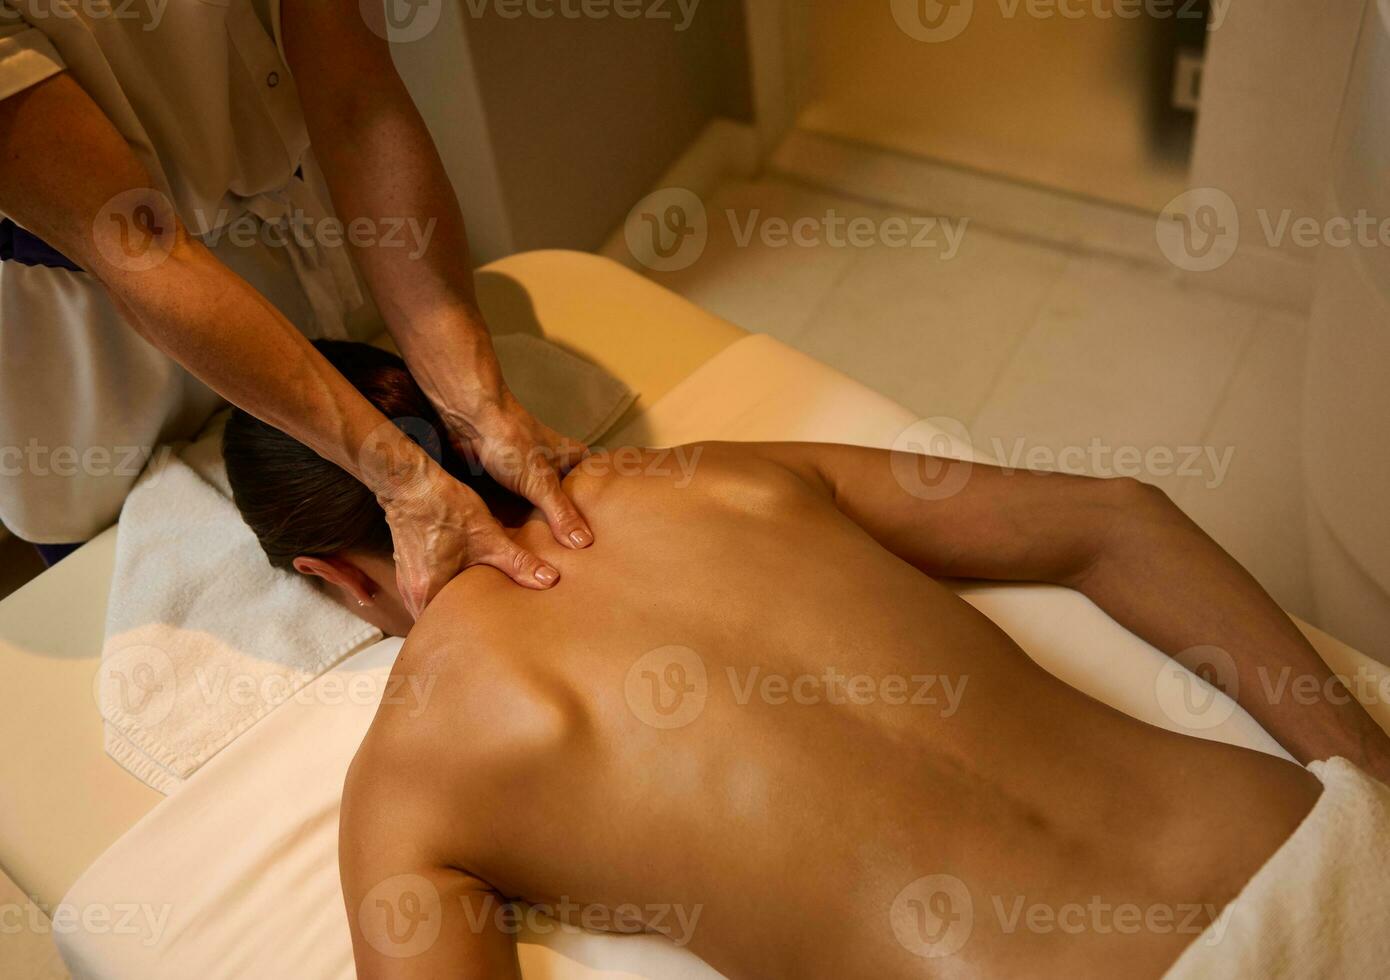 https://static.vecteezy.com/system/resources/previews/027/050/795/non_2x/top-view-of-unrecognizable-professional-masseuse-giving-medical-therapy-massage-to-young-woman-s-back-muscles-relaxing-on-massage-table-at-health-spa-center-ayurvedic-and-alternative-therapy-concept-photo.jpg